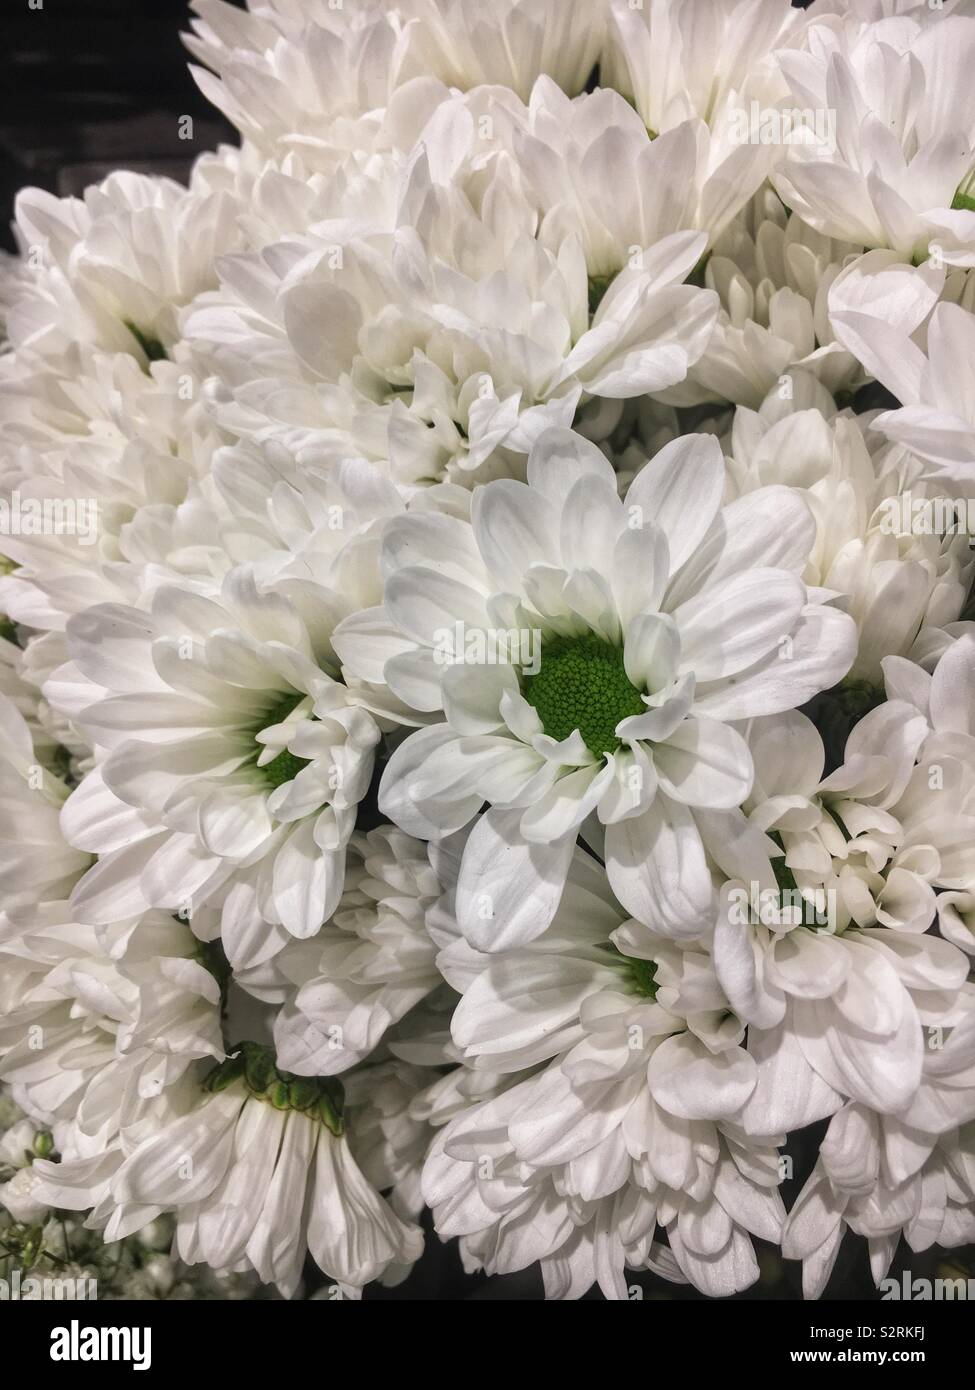 Beautiful bouquet of fresh white daisies in full bloom. Stock Photo